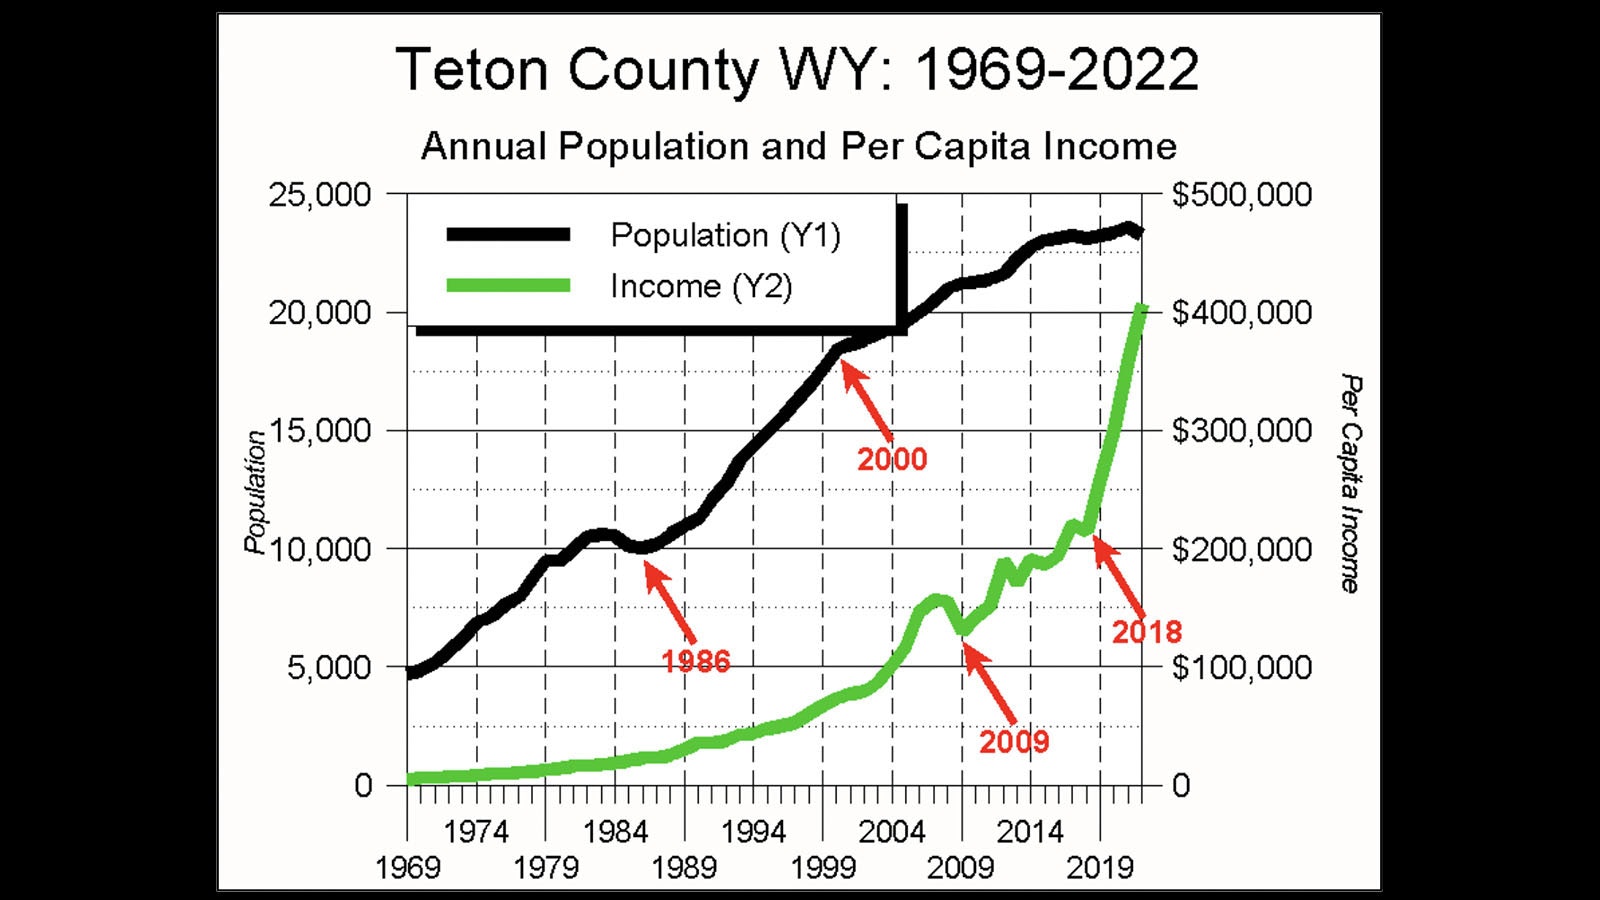 Population vs. per capita income over time, according to economist and Jackson Town Councilman Jonathan Schechter.